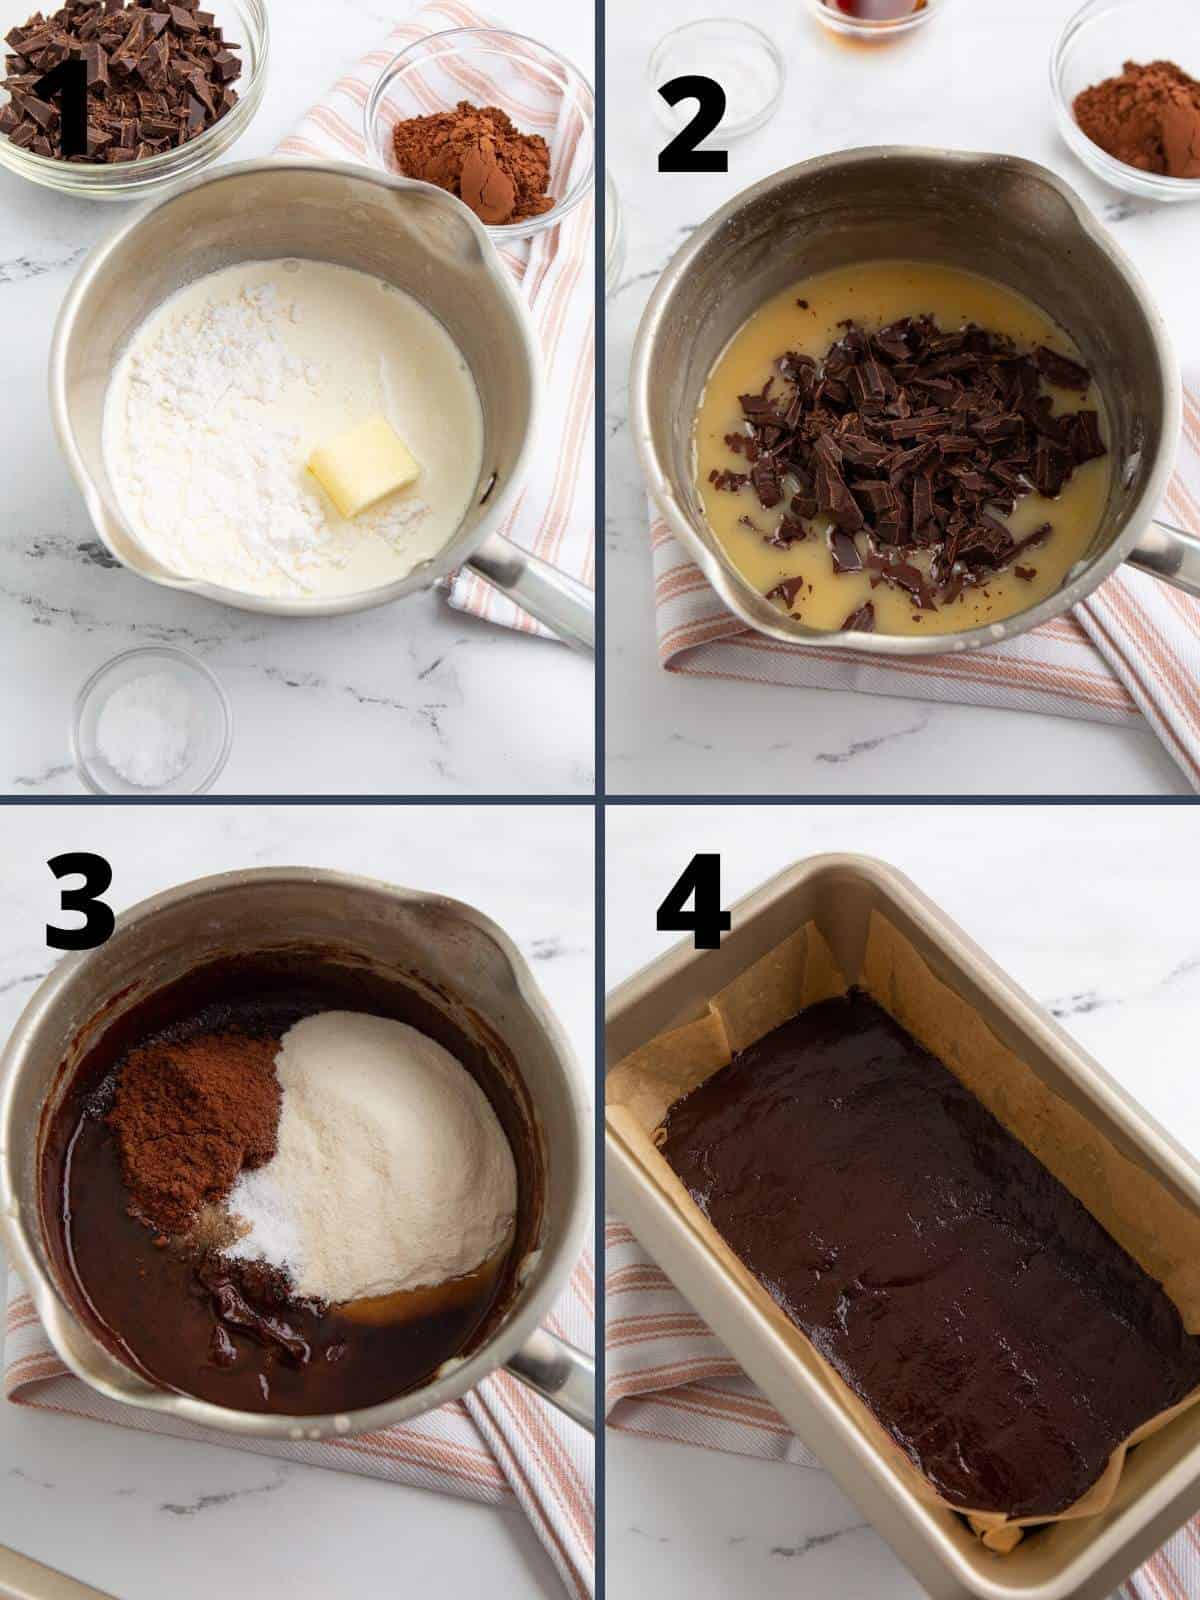 A collage of 4 images showing the steps for making keto fudge.